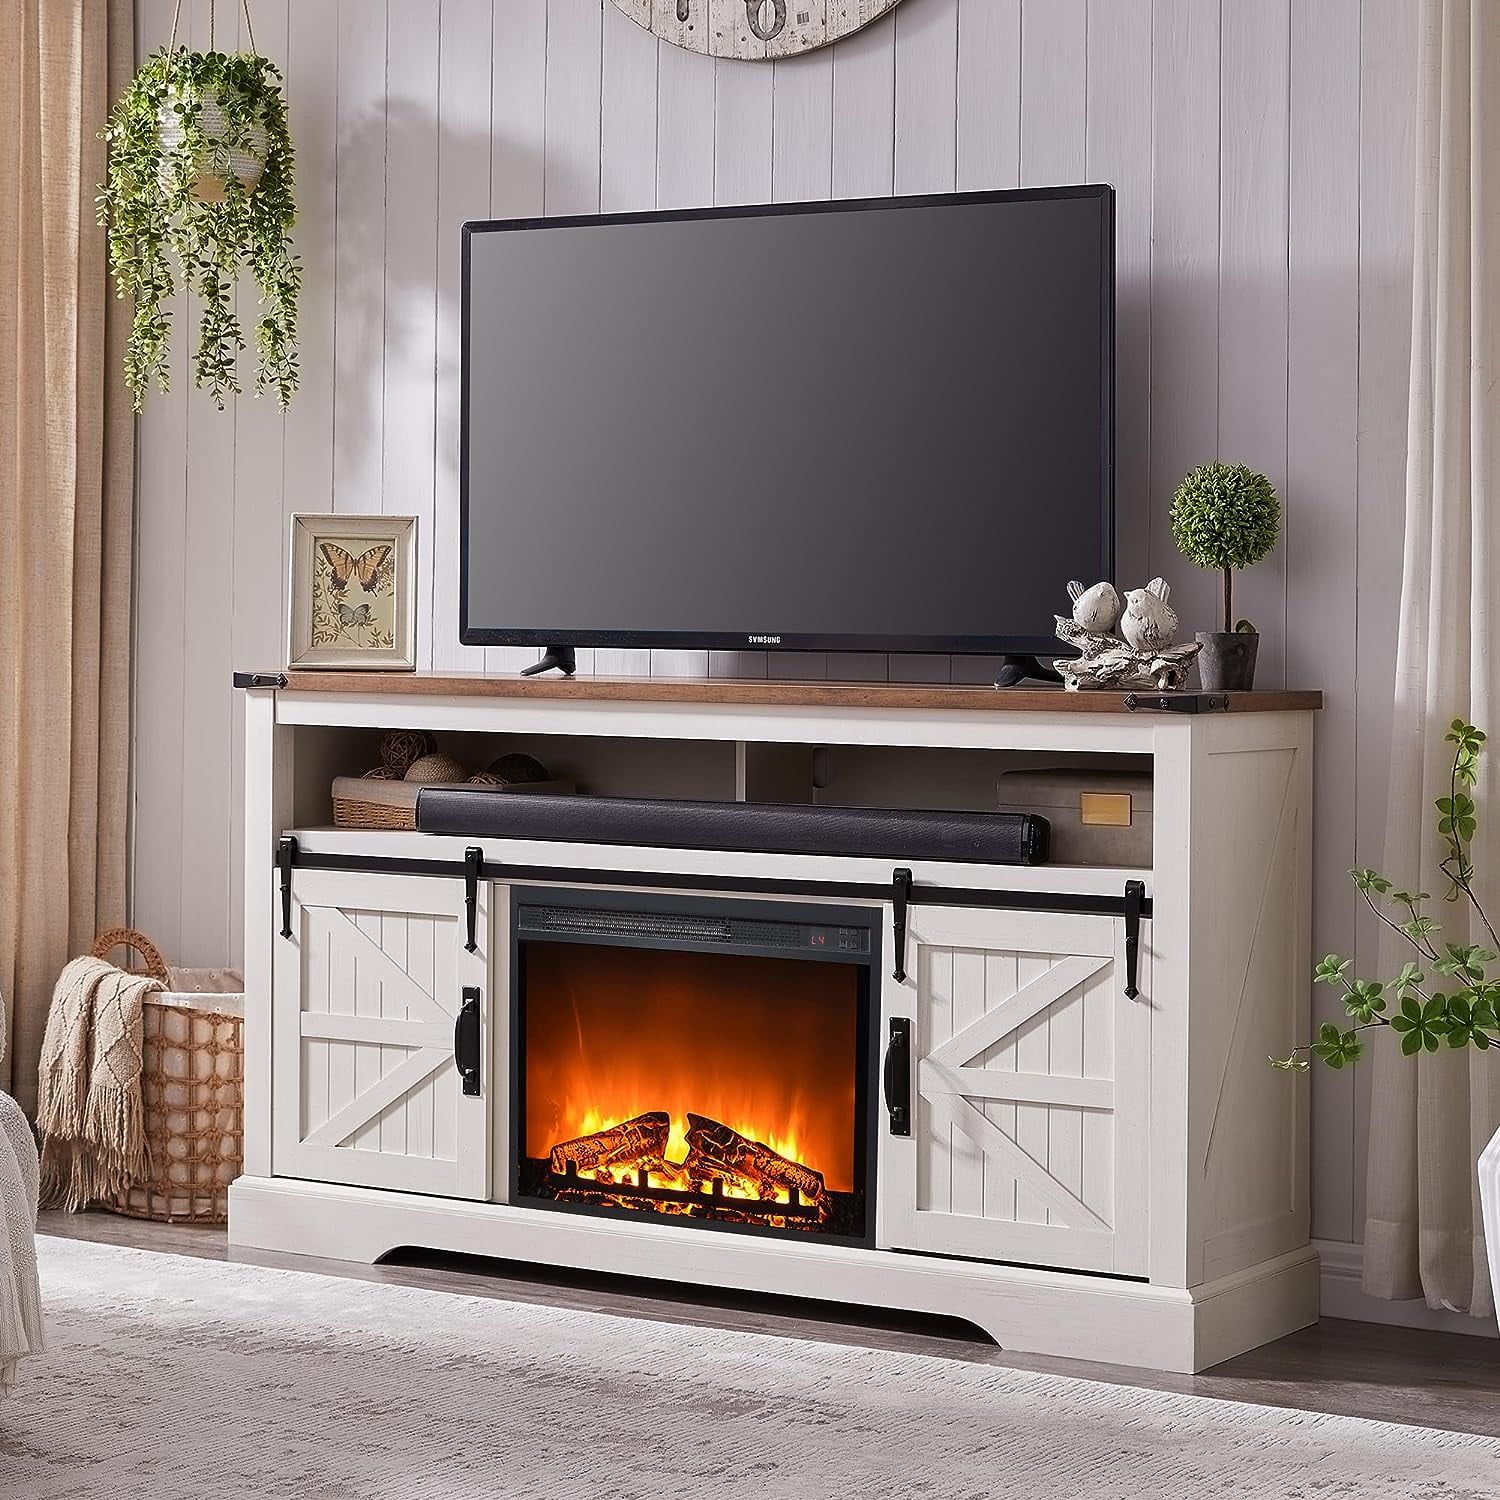 Okd Farmhouse 60" Electric Fireplace Tv Stand For Tvs Up To 65", Large Entertainment  Center With Fireplace For Living Room, Bedroom, Antique White – Walmart Regarding Tv Stands With Electric Fireplace (View 11 of 15)